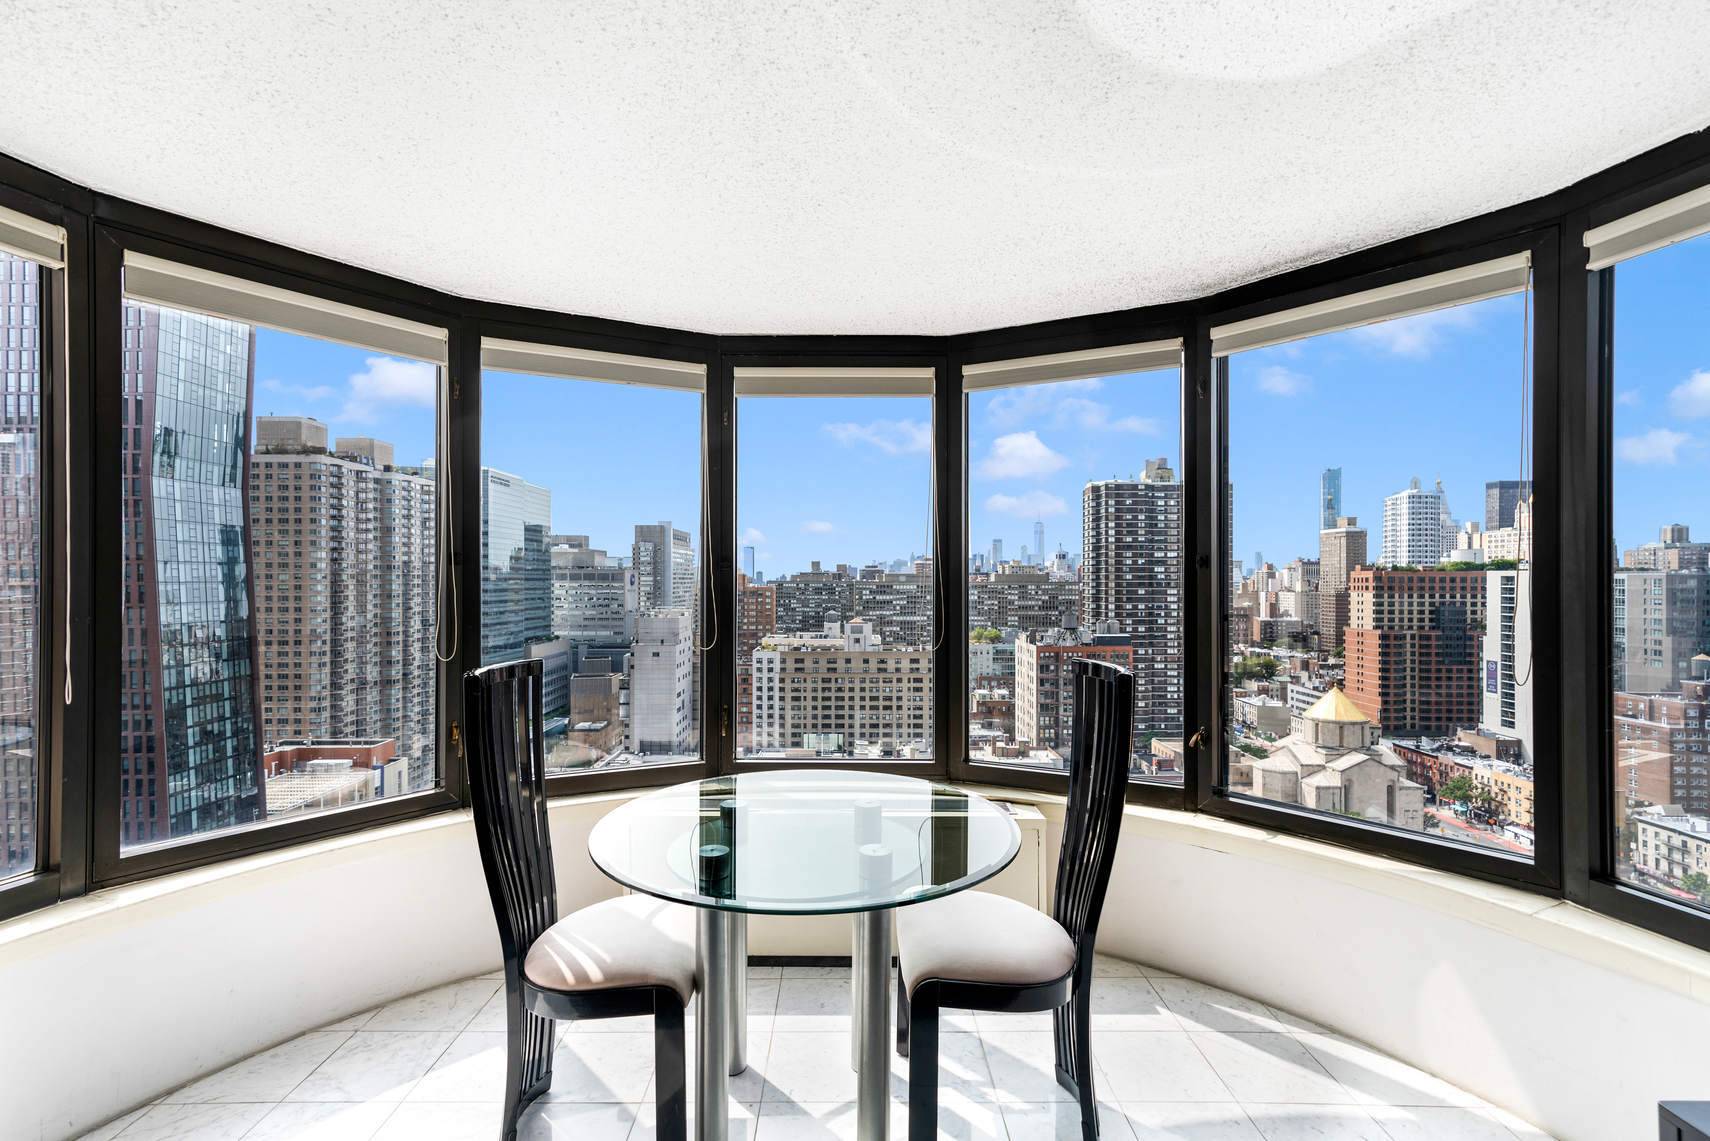 High in the Sky A Home A Pied A Terre Or An Investment A large studio with spectacular East, South, and West views is a rare find.